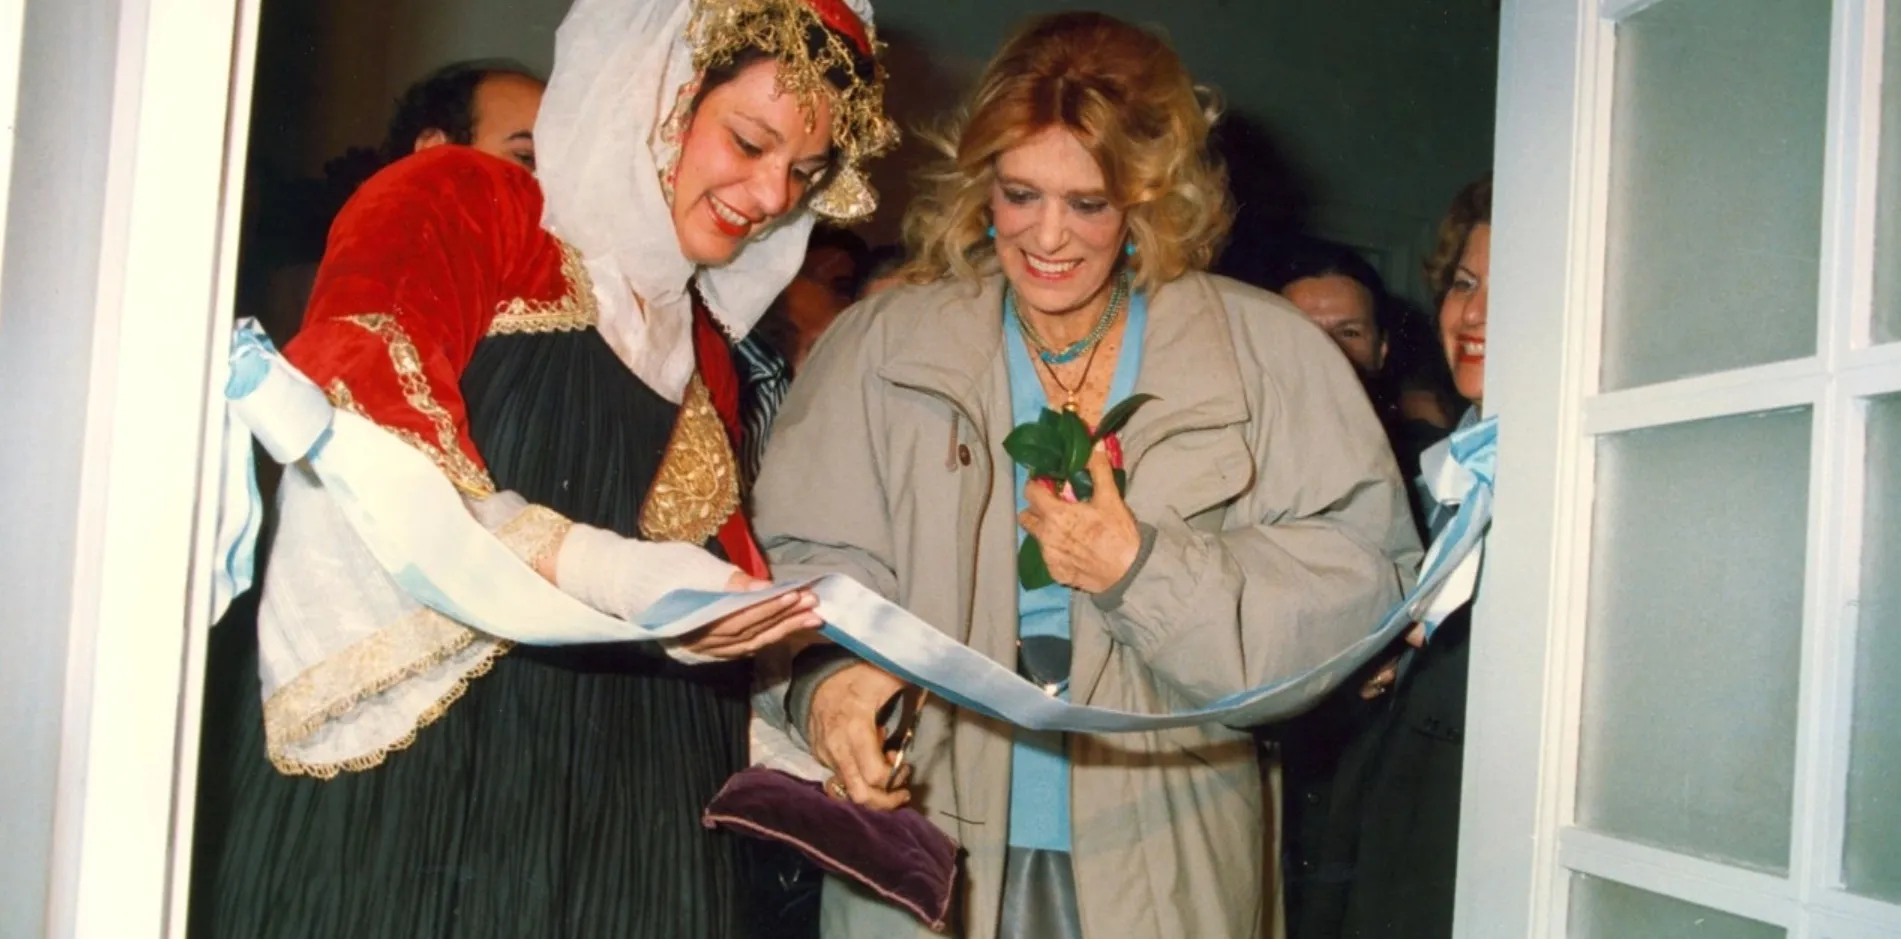 8th March 1988. Melina Merkouri, then the Minister of Culture, cuts the ribbon at the opening of the Museum. CMLE archive.